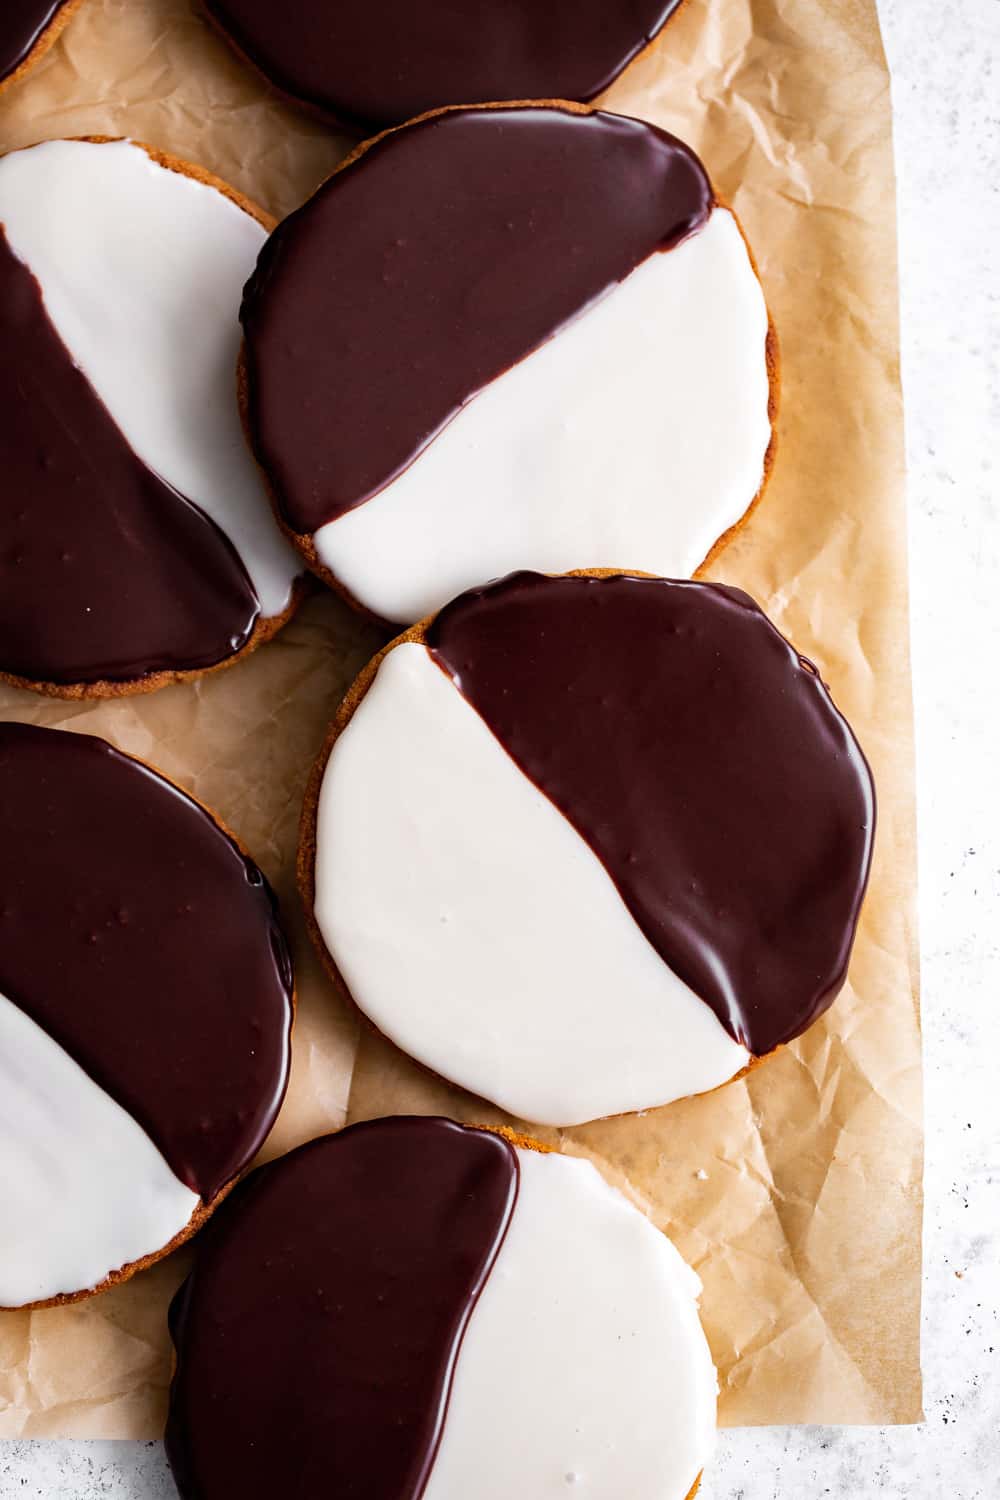 These homemade Black and White Cookies taste just like everyone's favorite New York City style bakery cookies - so much so that you'd never guess they're grain free!  This gluten free and grain free cookie recipe has dairy free and paleo options so everyone can enjoy these classic cookies at home!  #paleobaking #glutenfree #grainfree #paleo #cleaneating #glutenfreebaking #healthybaking